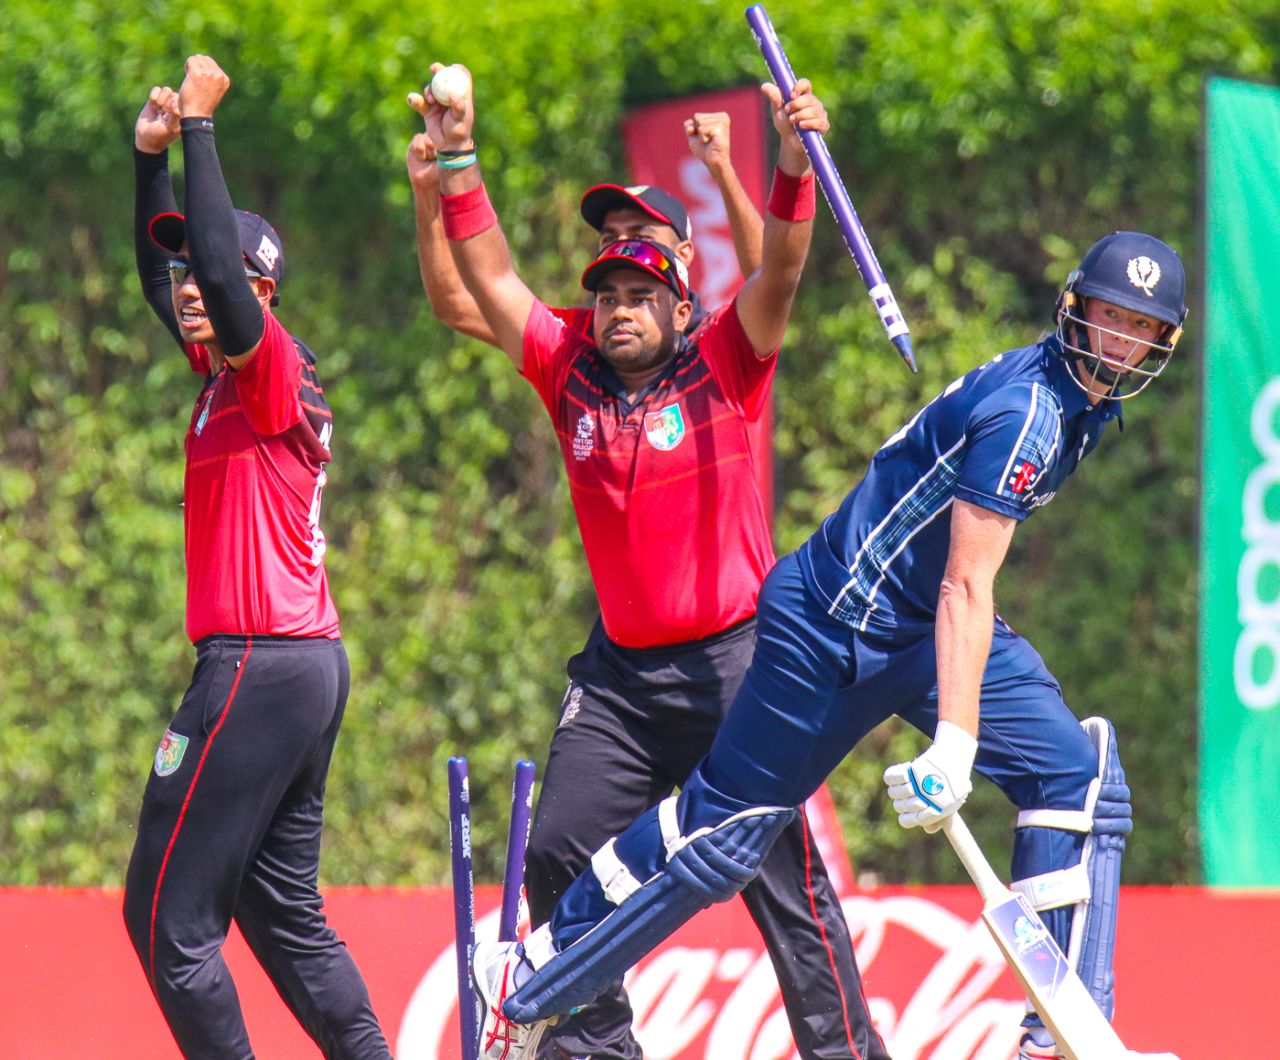 Singapore's Aritra Dutta rips out the stumps with ball in hand to end the match, Scotland v Singapore, T20 World Cup Qualifier, Dubai, October 18, 2019